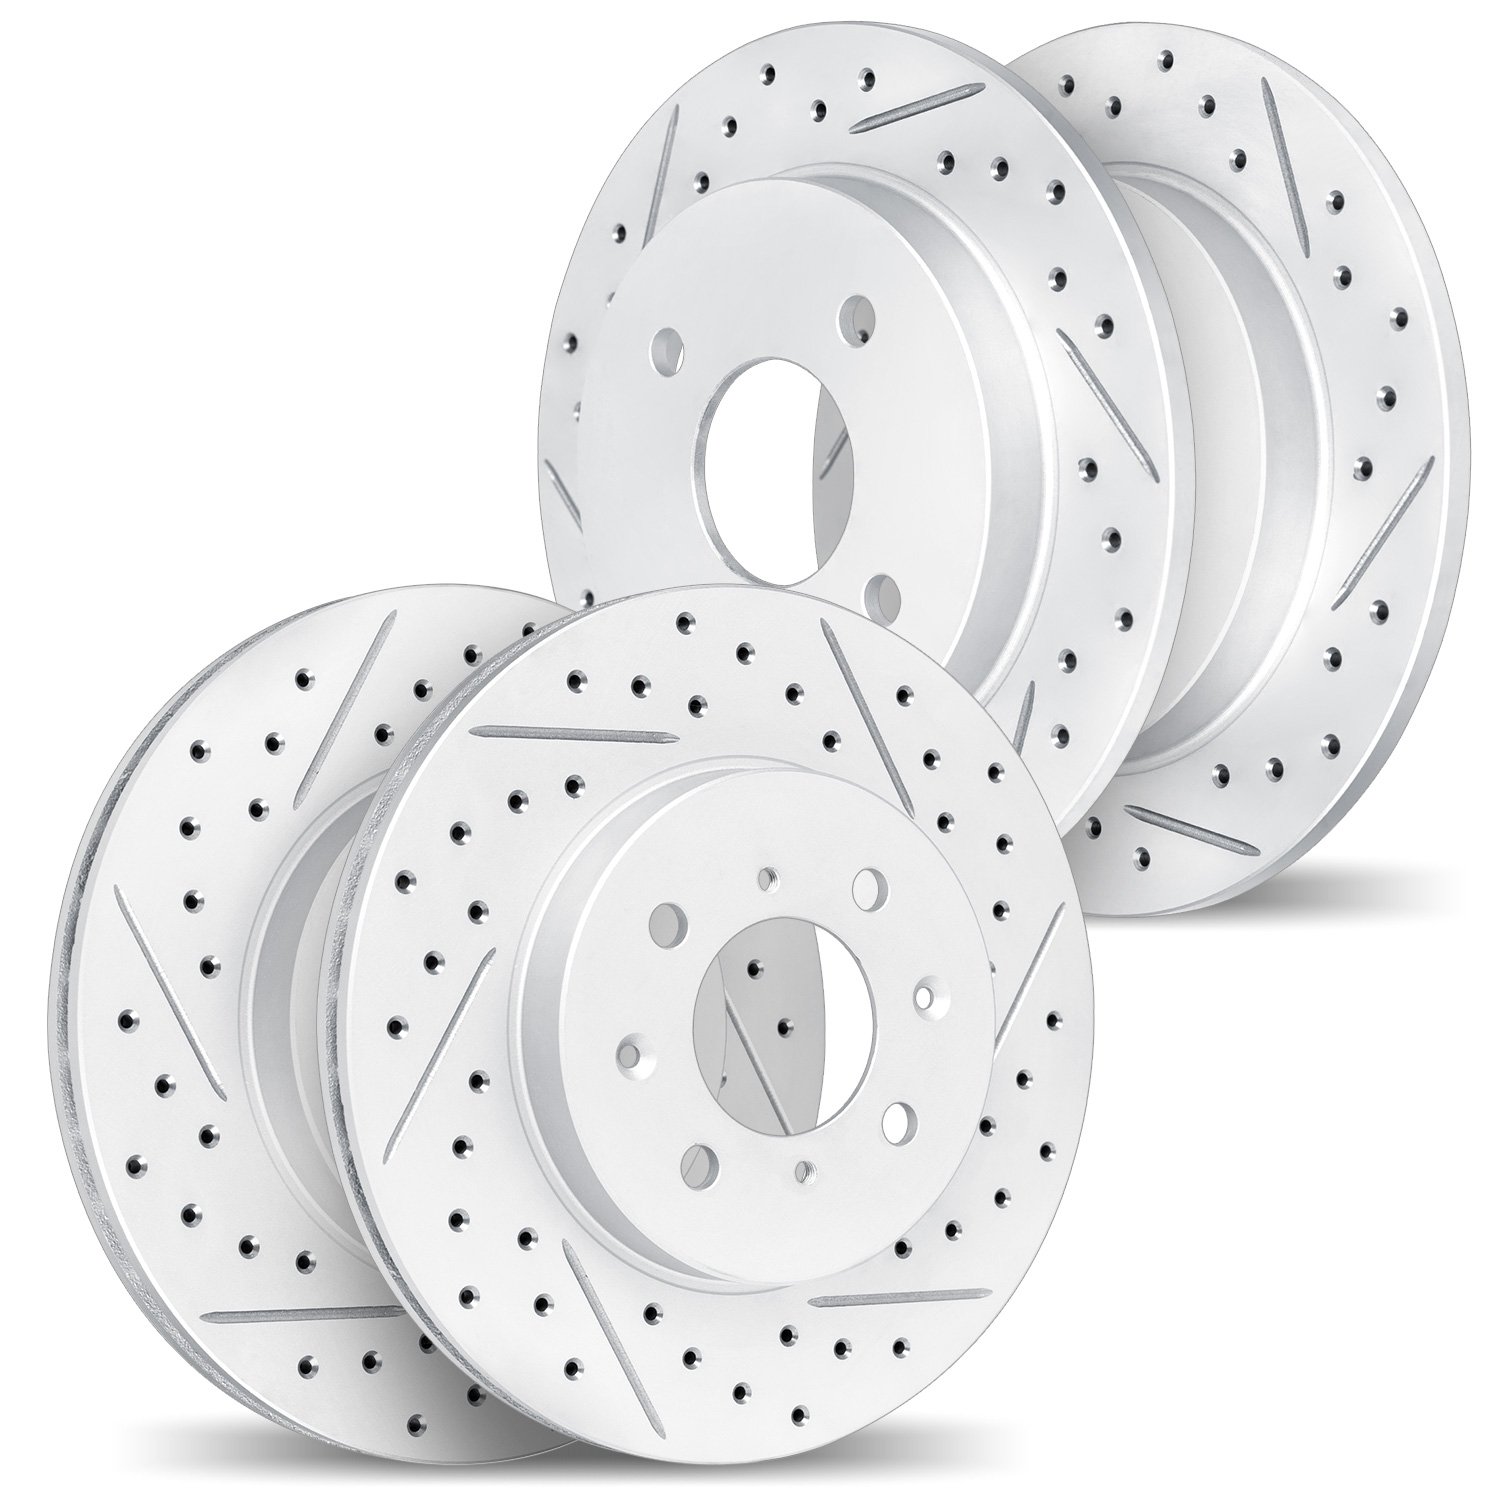 2004-59044 Geoperformance Drilled/Slotted Brake Rotors, 1992-1997 Acura/Honda, Position: Front and Rear